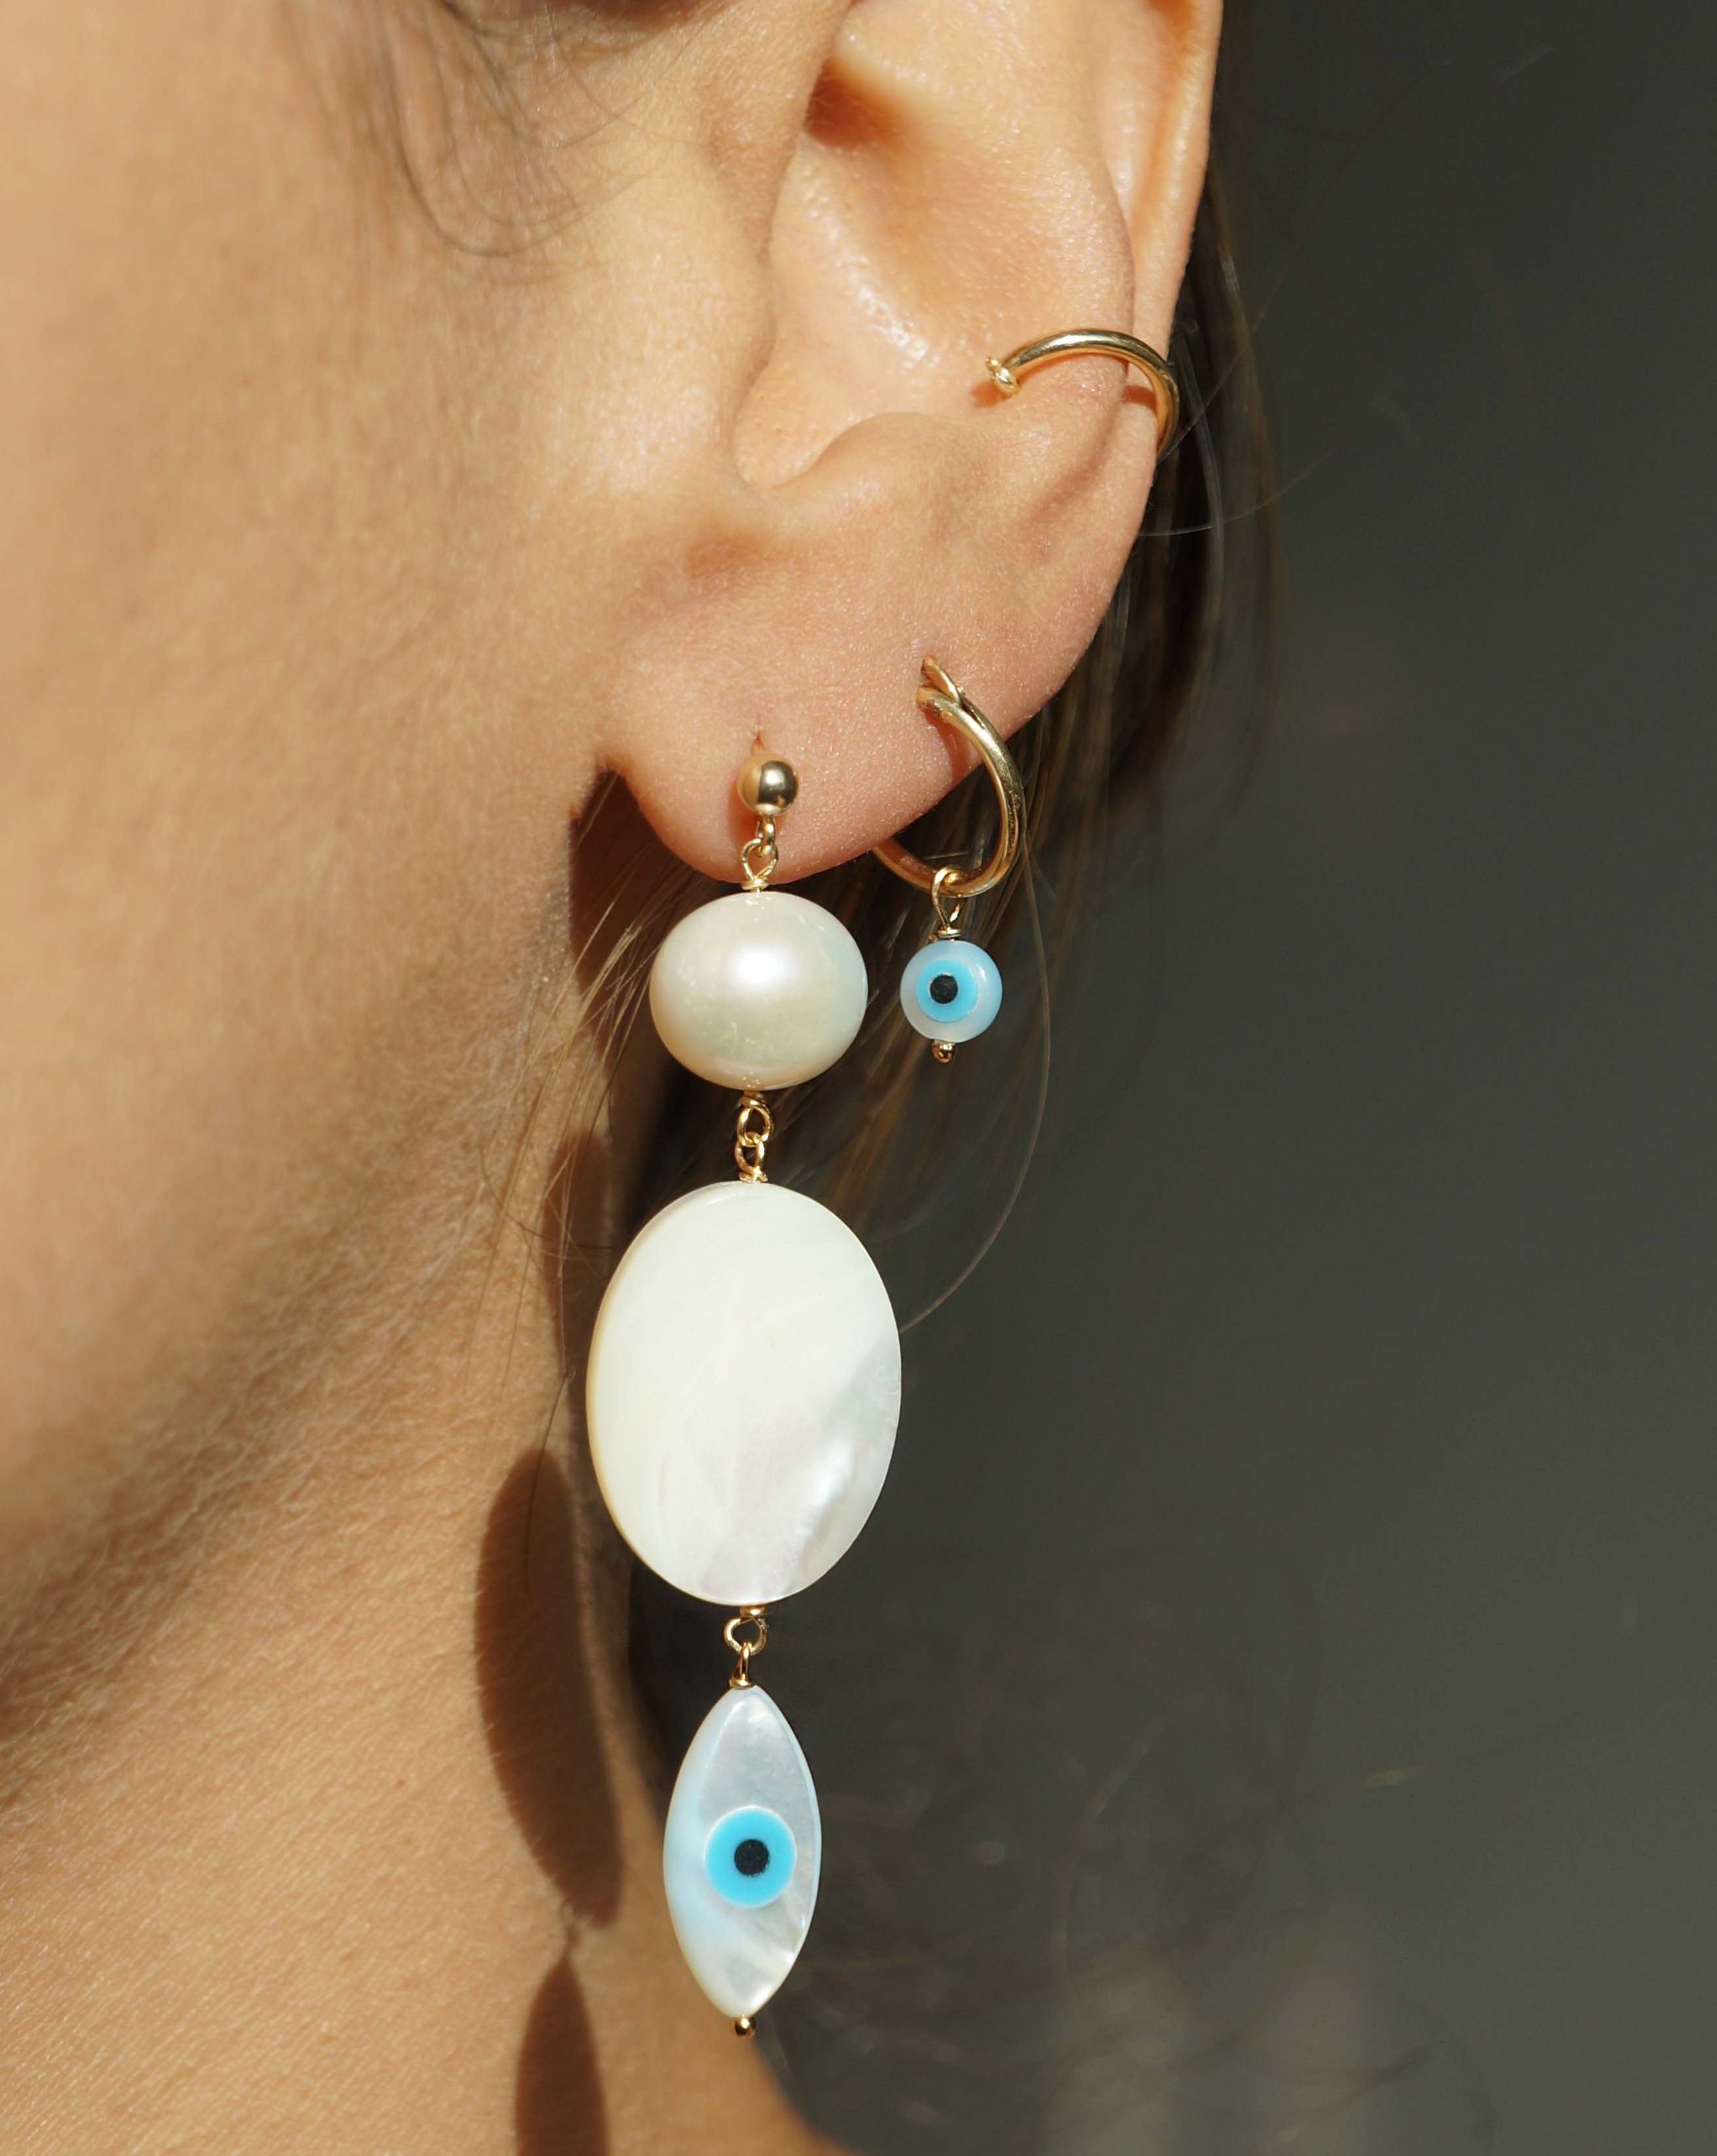 Ellie Hoops by Kozakh. 12mm hoop earrings, crafted in 14K Gold Filled, featuring a Mother of Pearl Evil Eye.